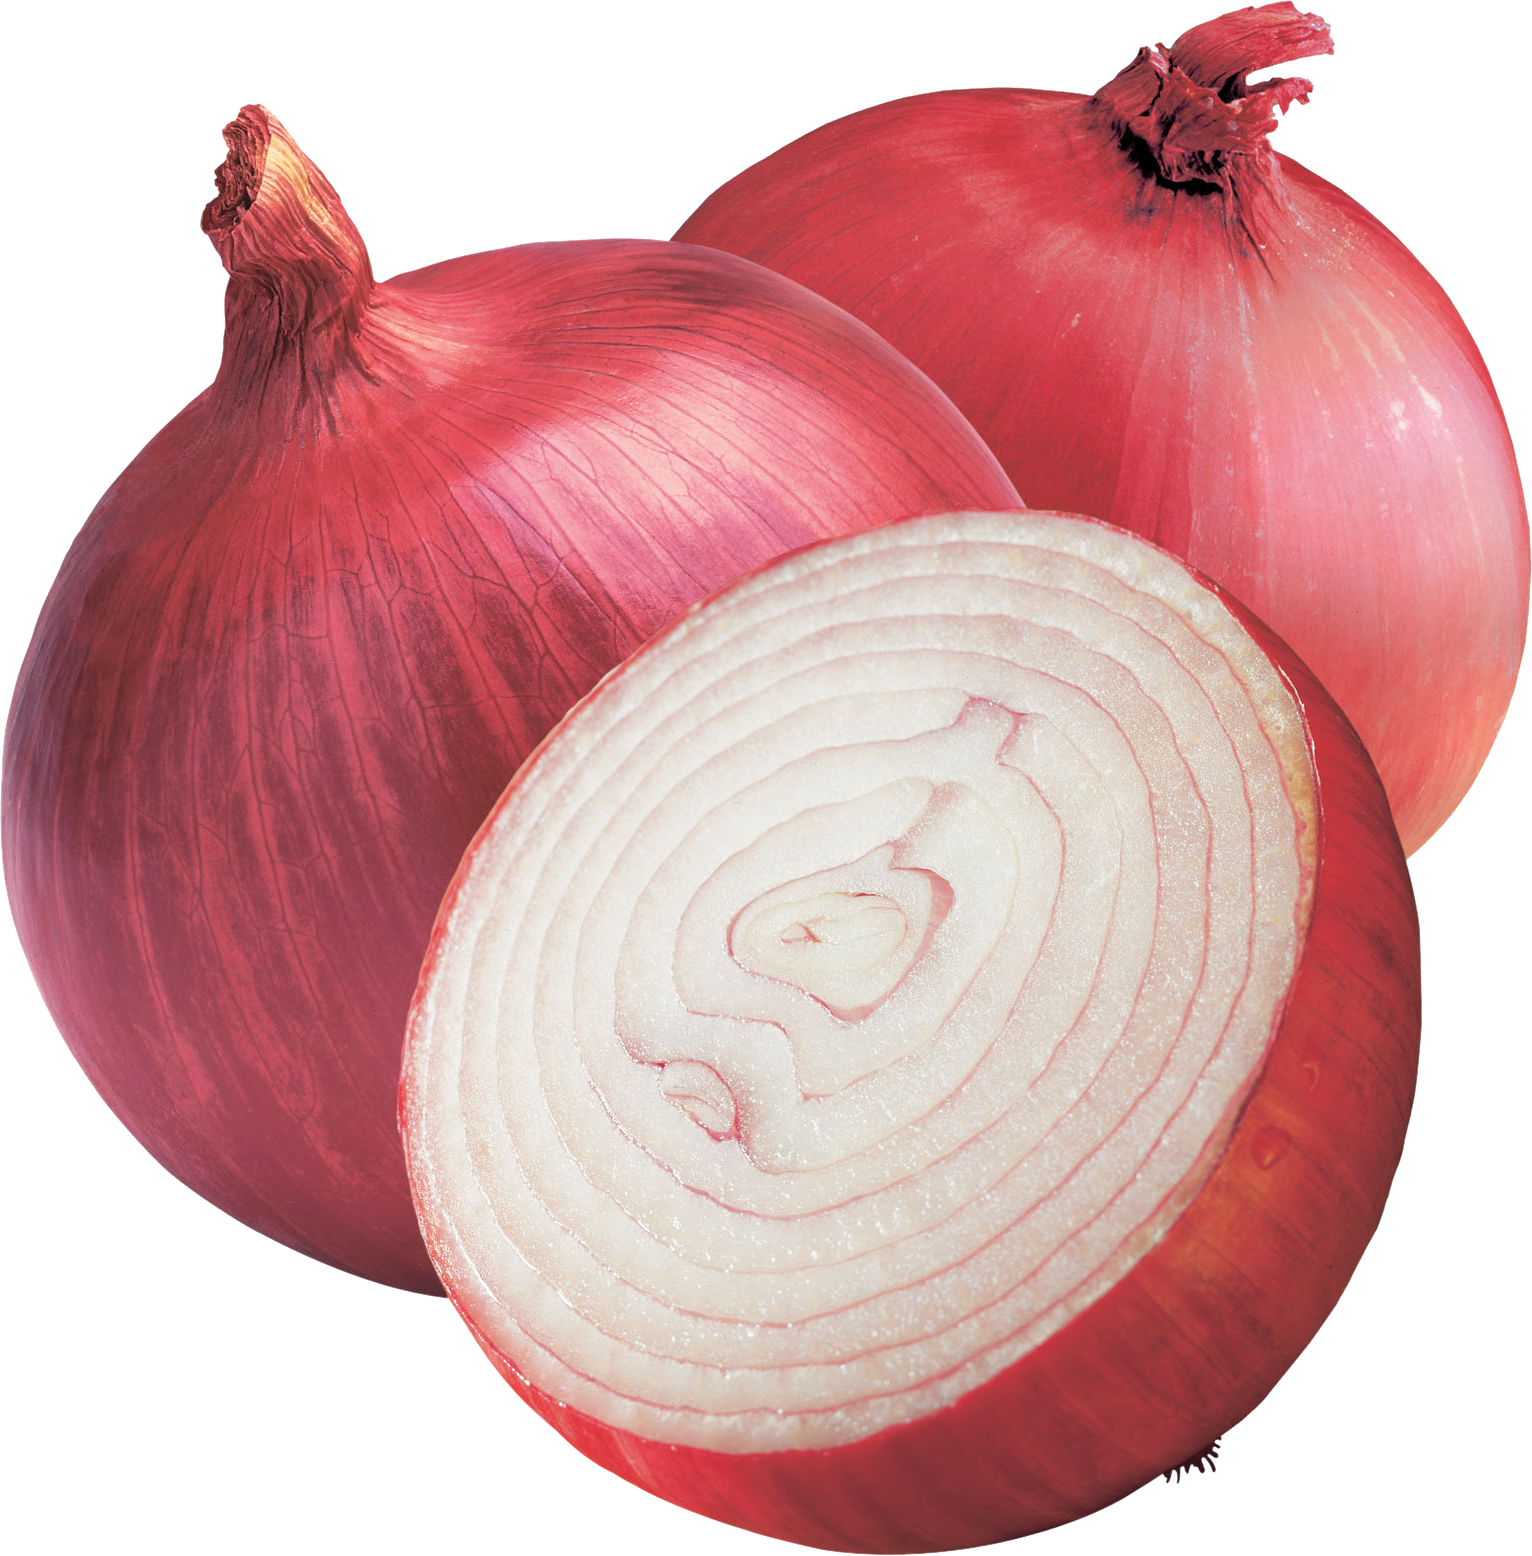 Onion PNG Background Image